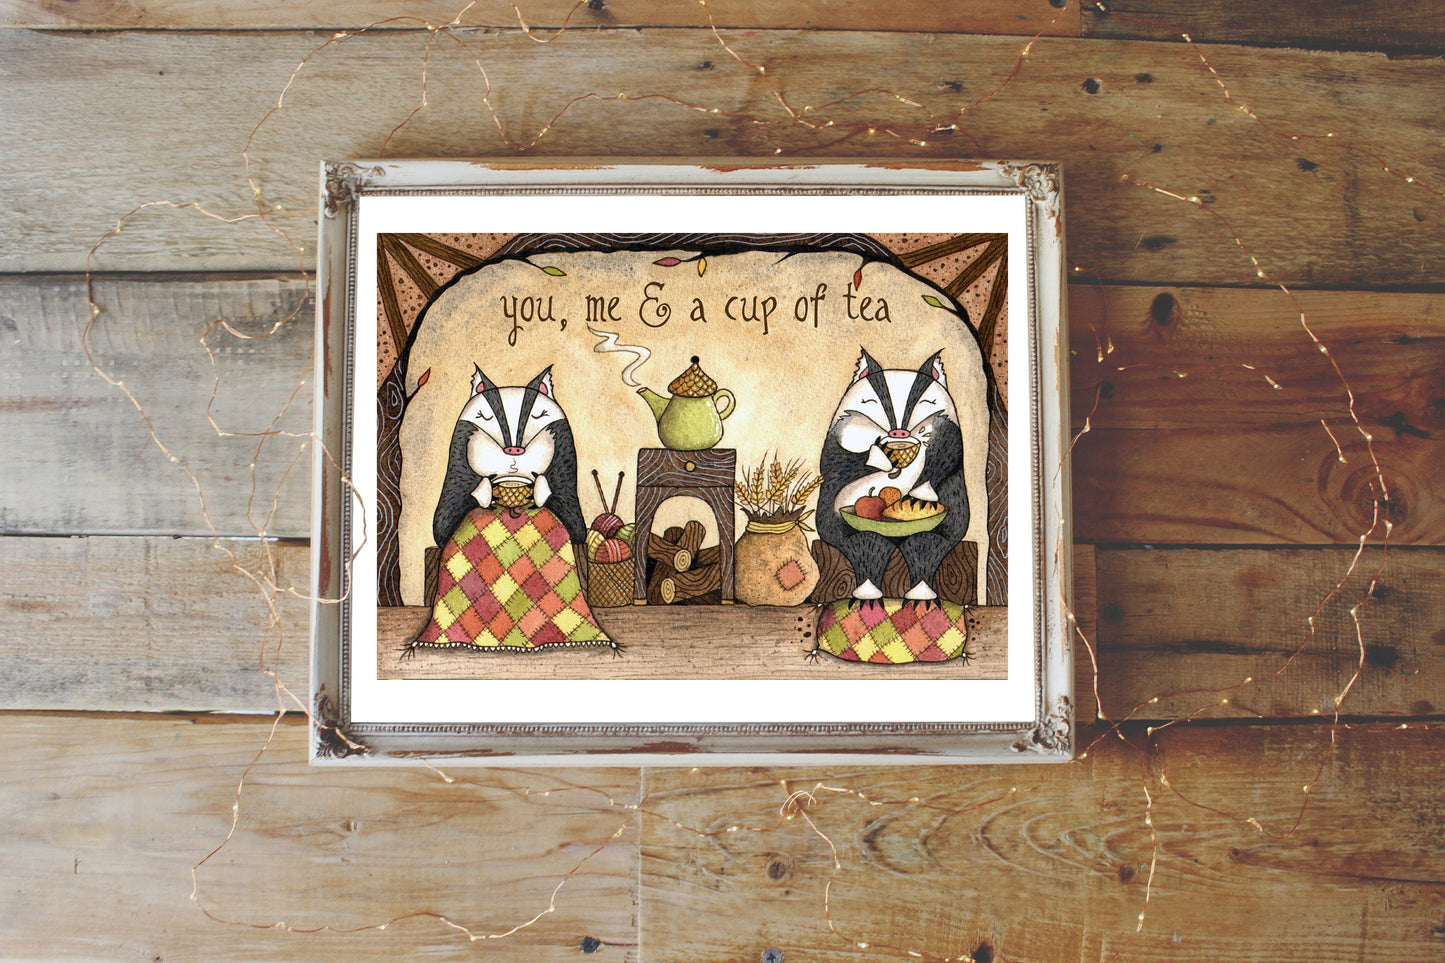 Badgers Drinking Tea Print - Watercolour Cosy In Love Badgers A5 - A4 - A3 Illustration Art Print - Whimsical Valentines Anniversary Decor